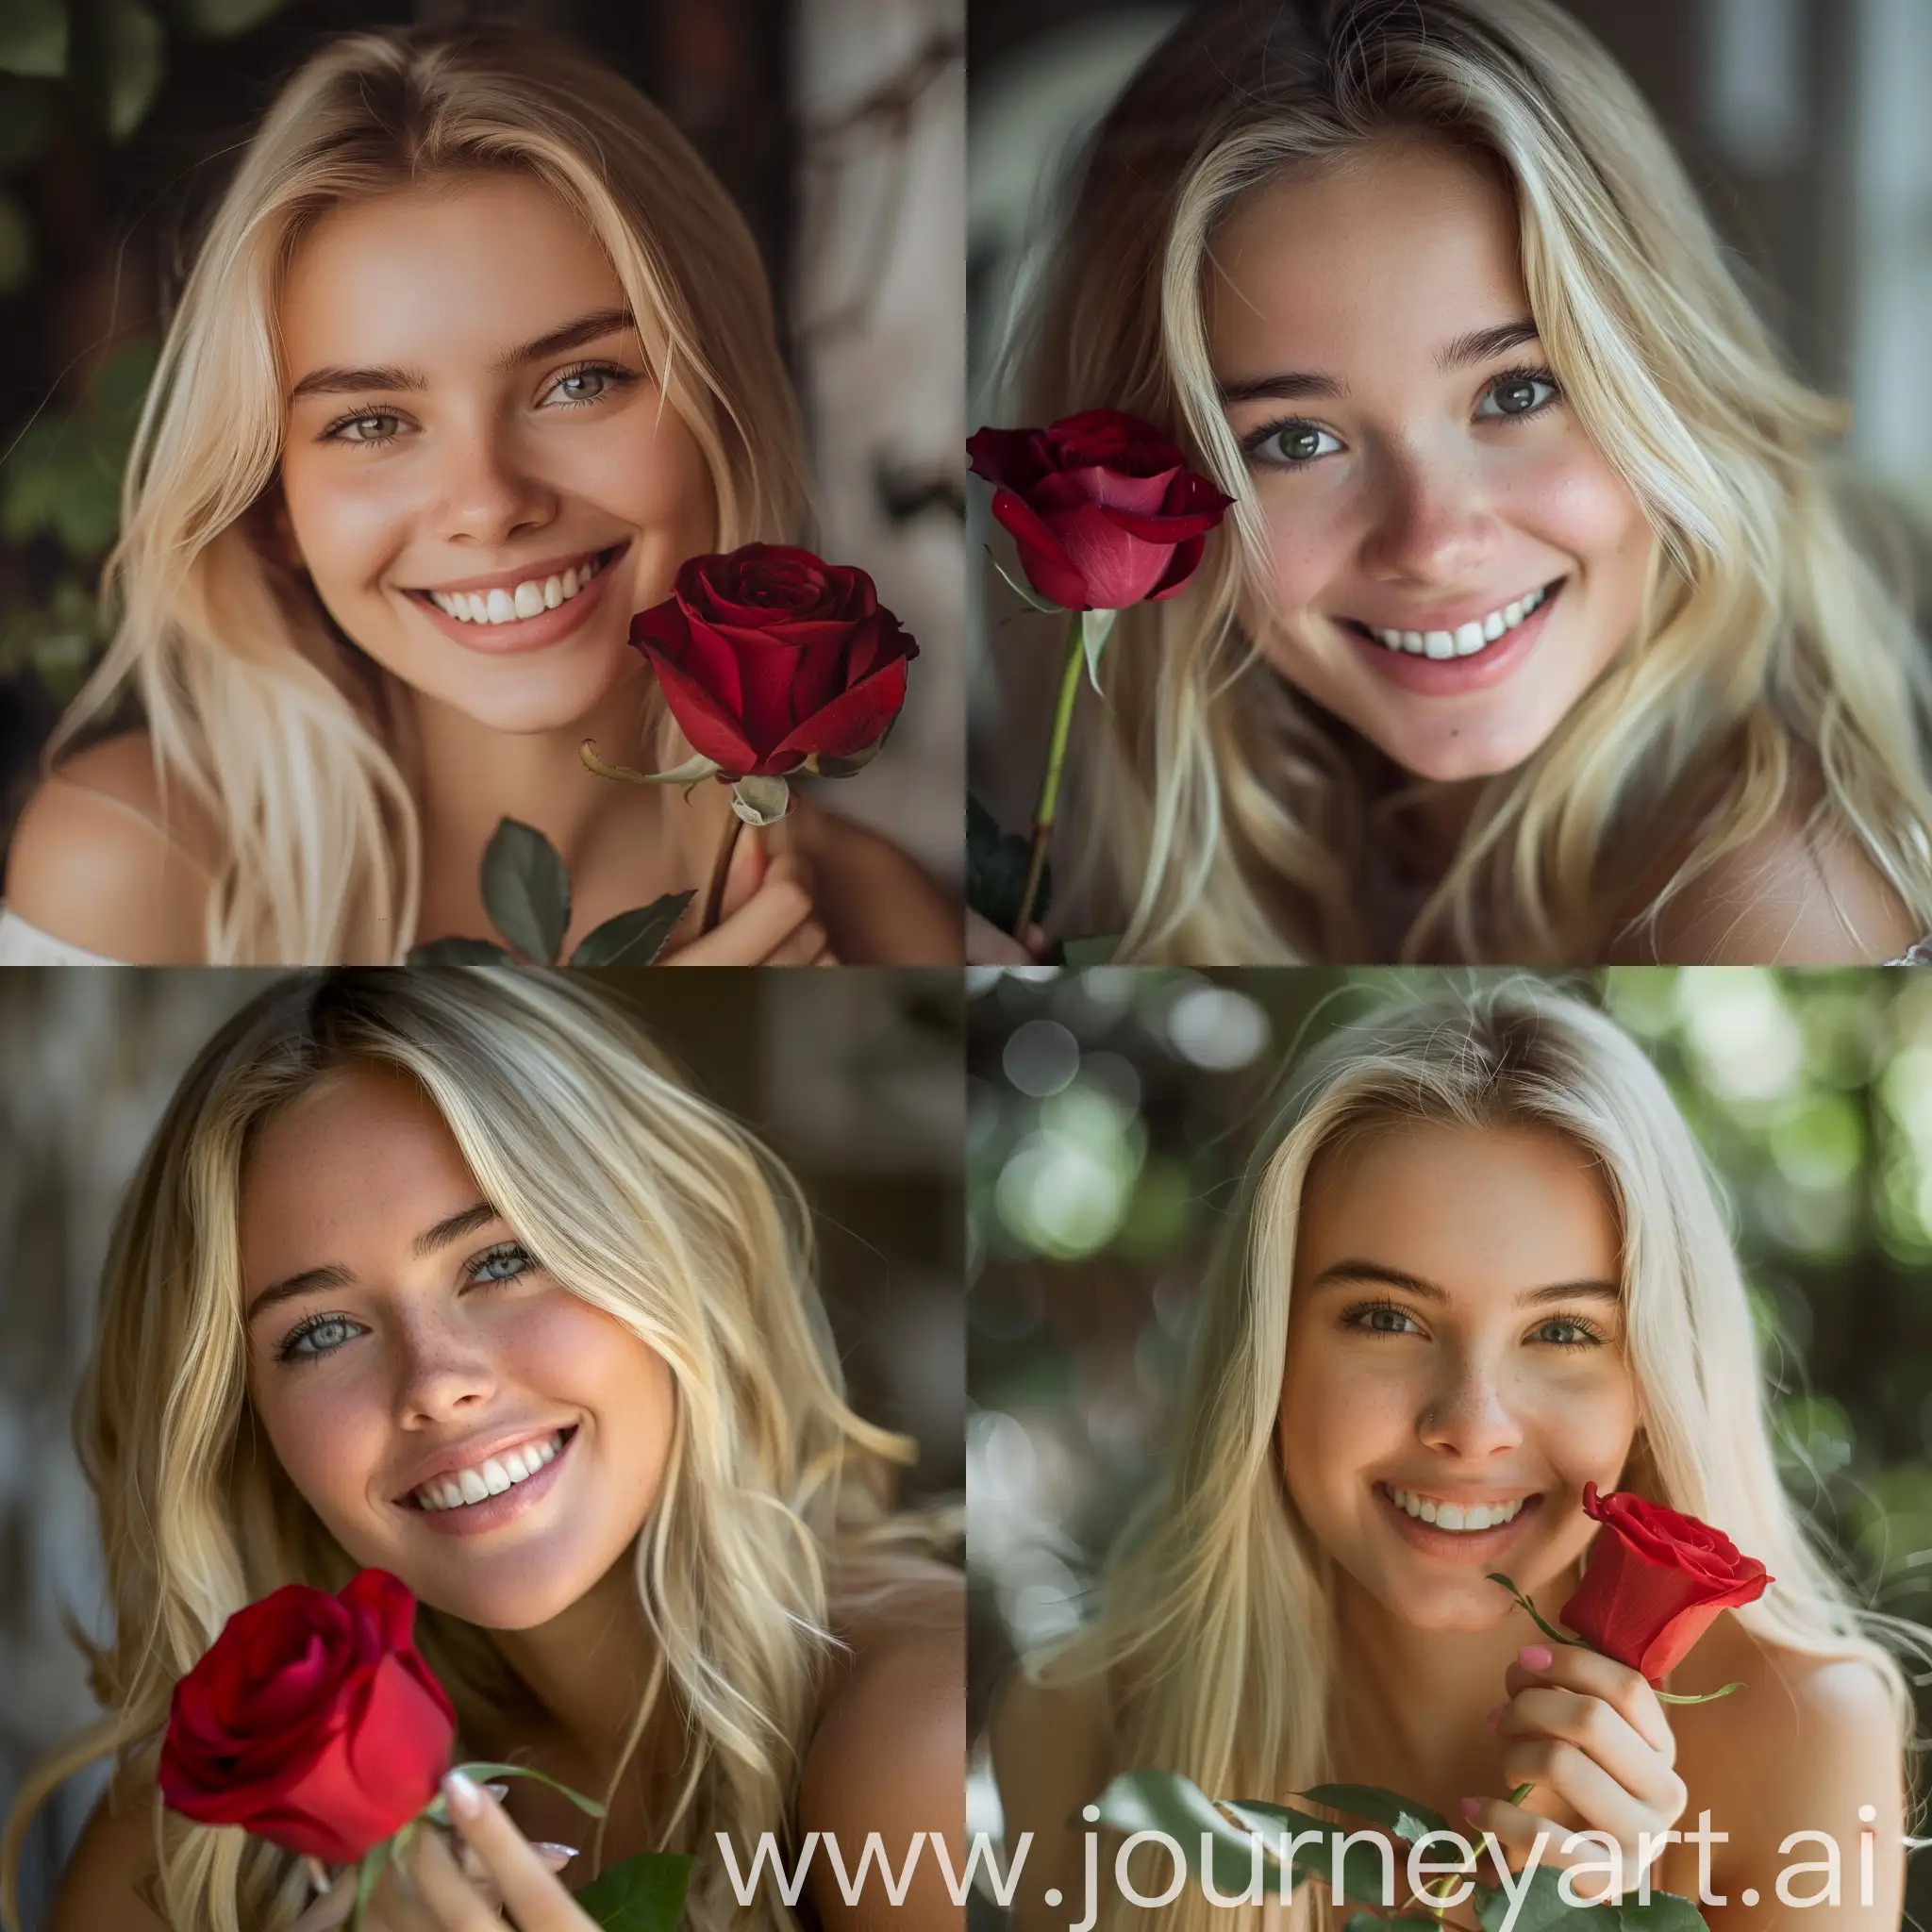 Radiant-Blonde-Girl-Holding-Red-Rose-with-Affectionate-Smile